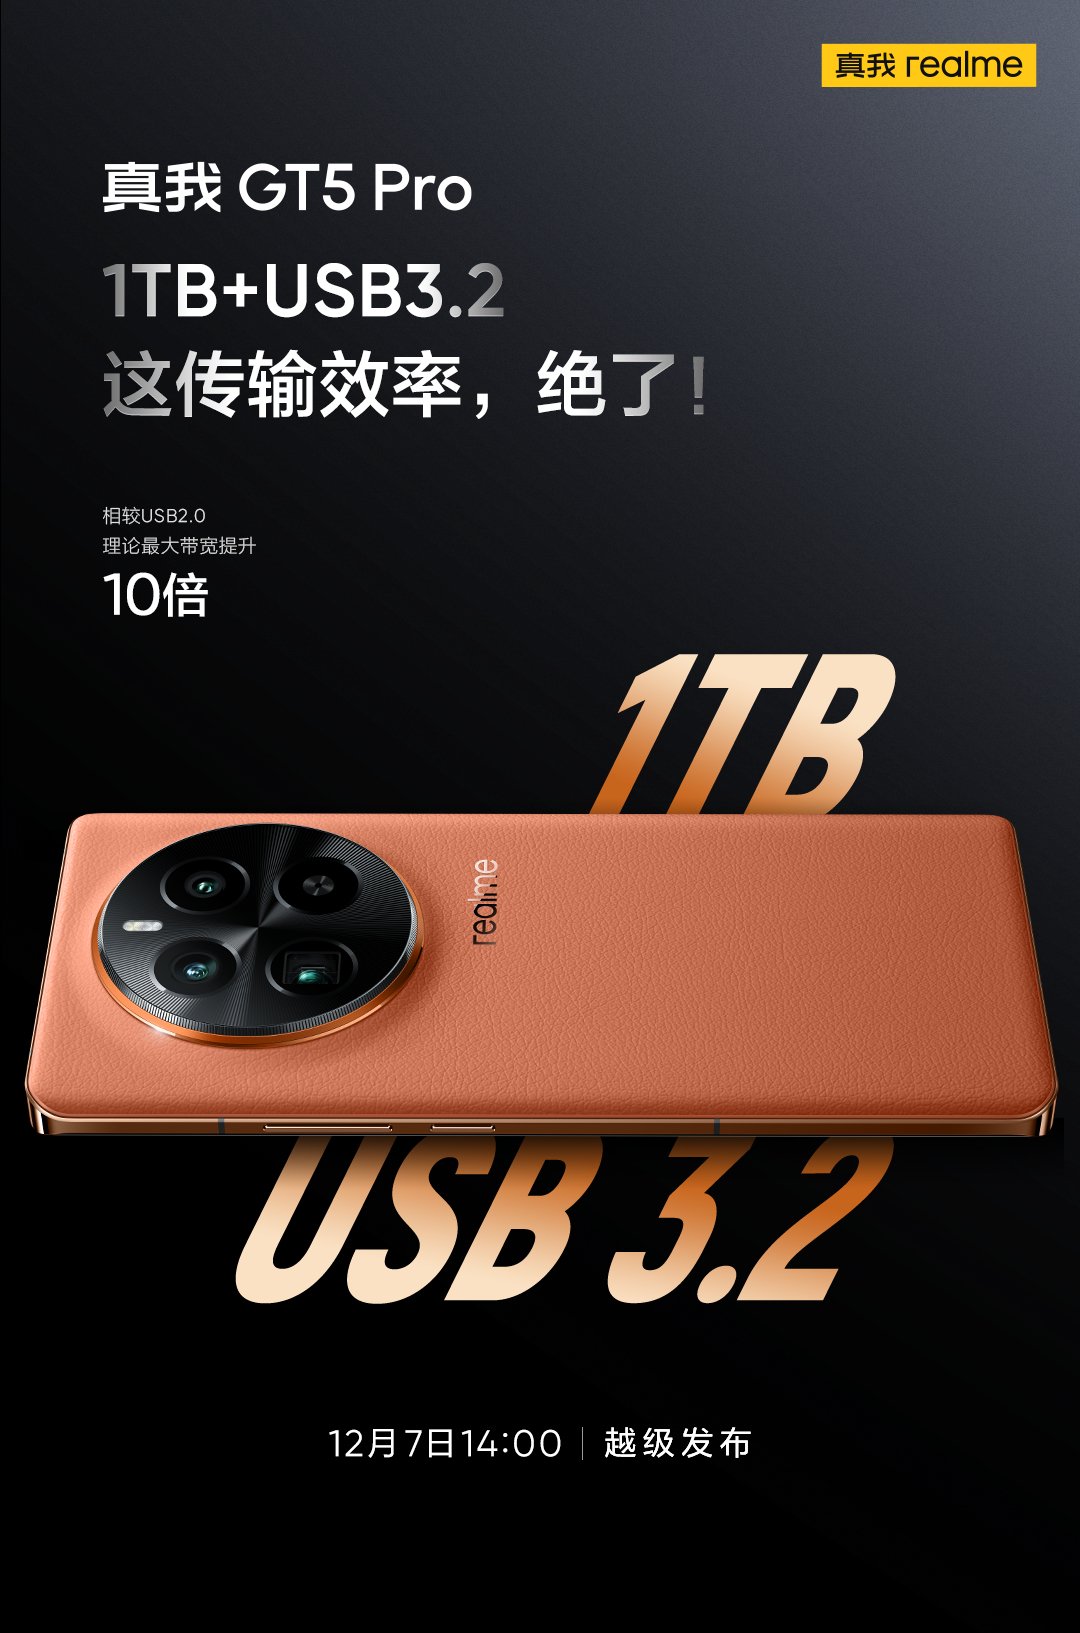 Ishan Wankhade 𝕏 on X: realme GT5 Pro to feature up to 1TB storage and  USB 3.2 #realme #realmeGT5Pro  / X